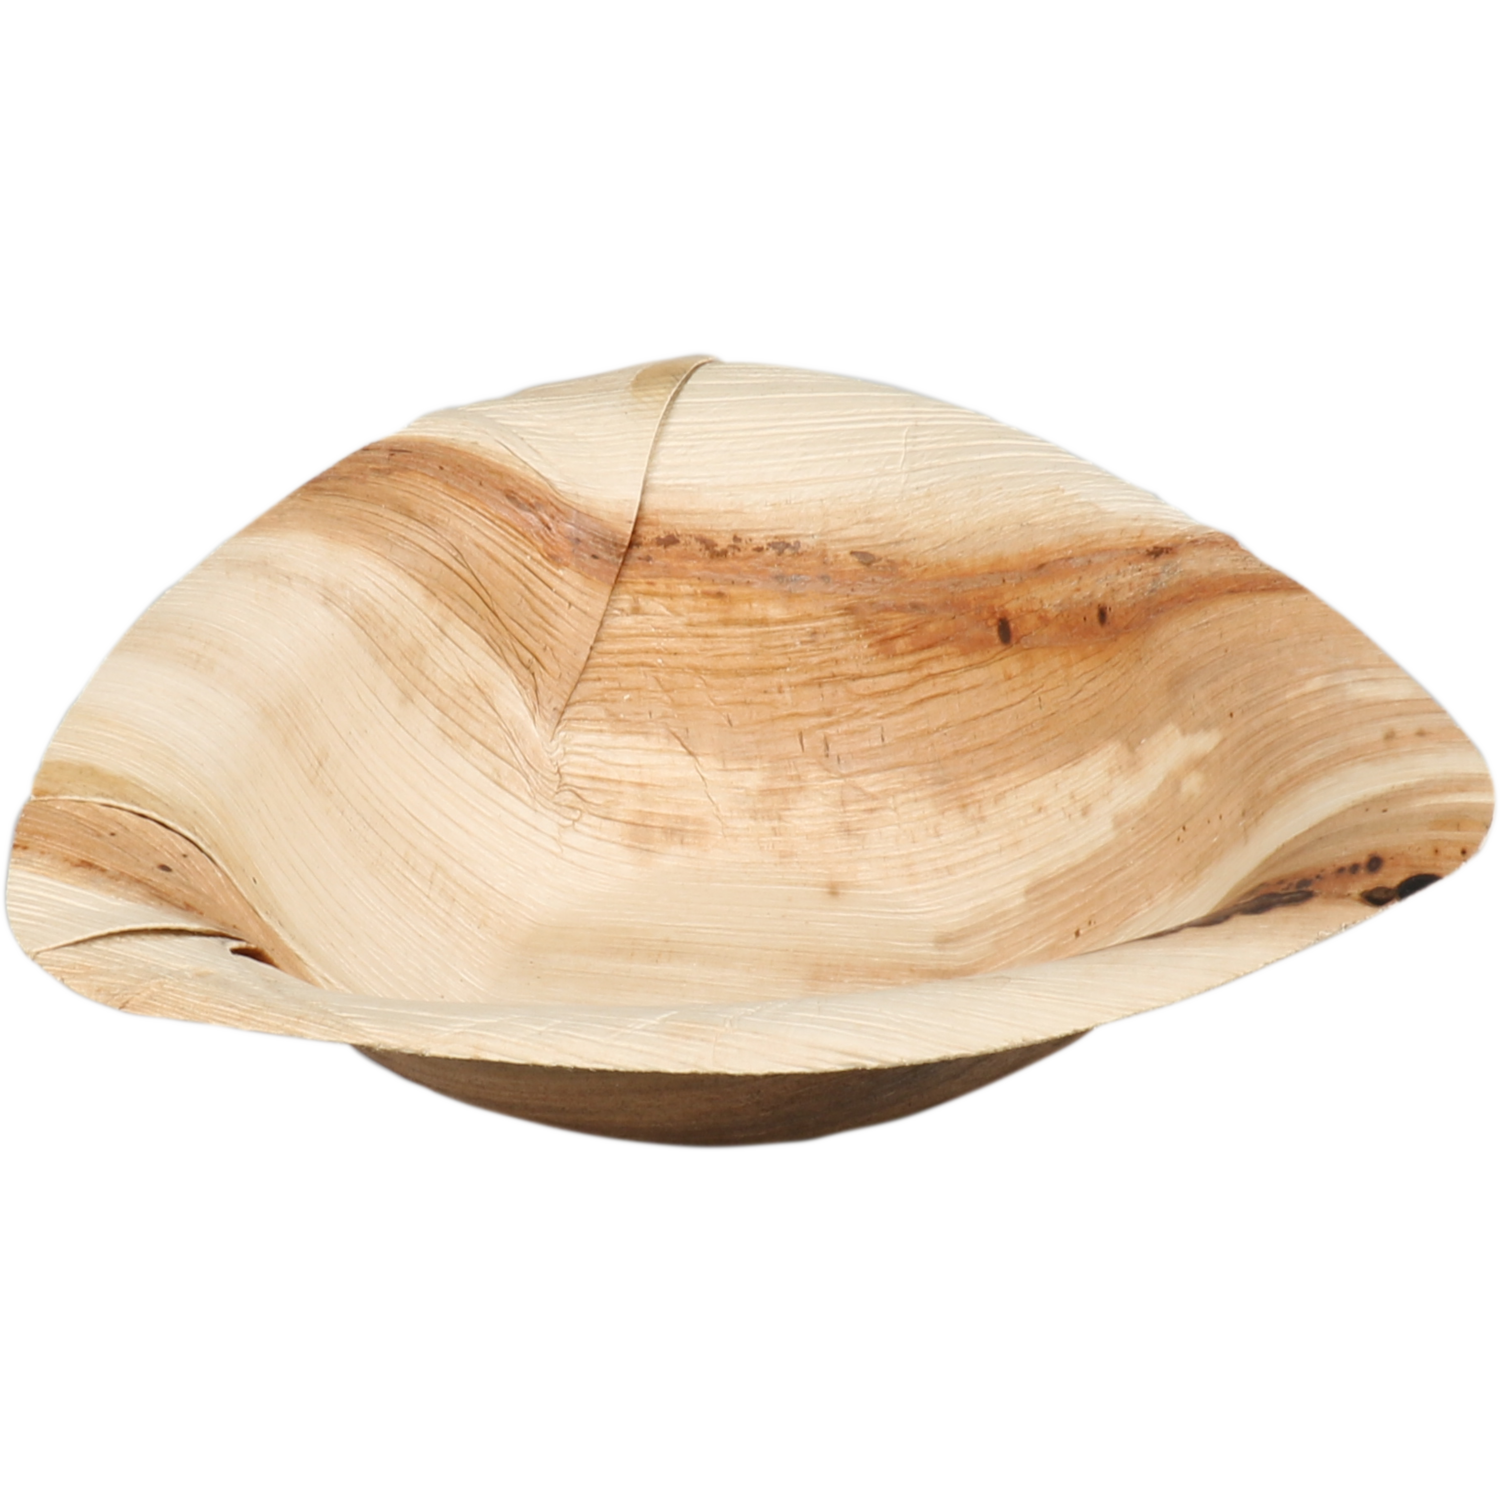 Biodore Amuse, Palm frond, 66mm, 211mm, 204mm, natural 1